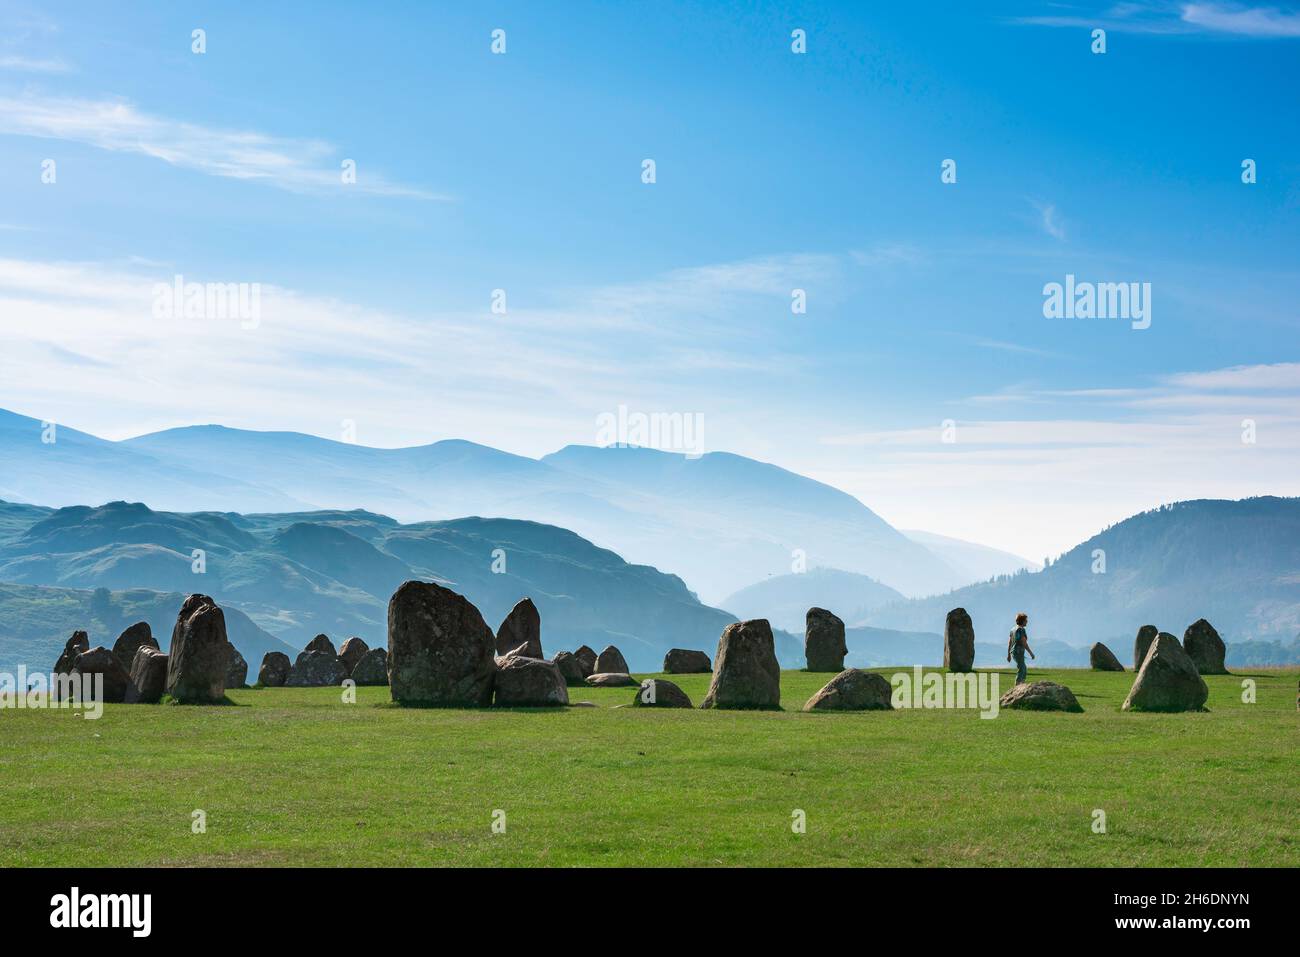 Stone circle UK, view on a summer morning of a woman walking inside an ancient stone circle against a backdrop of mountains, Castlerigg, Cumbria, UK Stock Photo